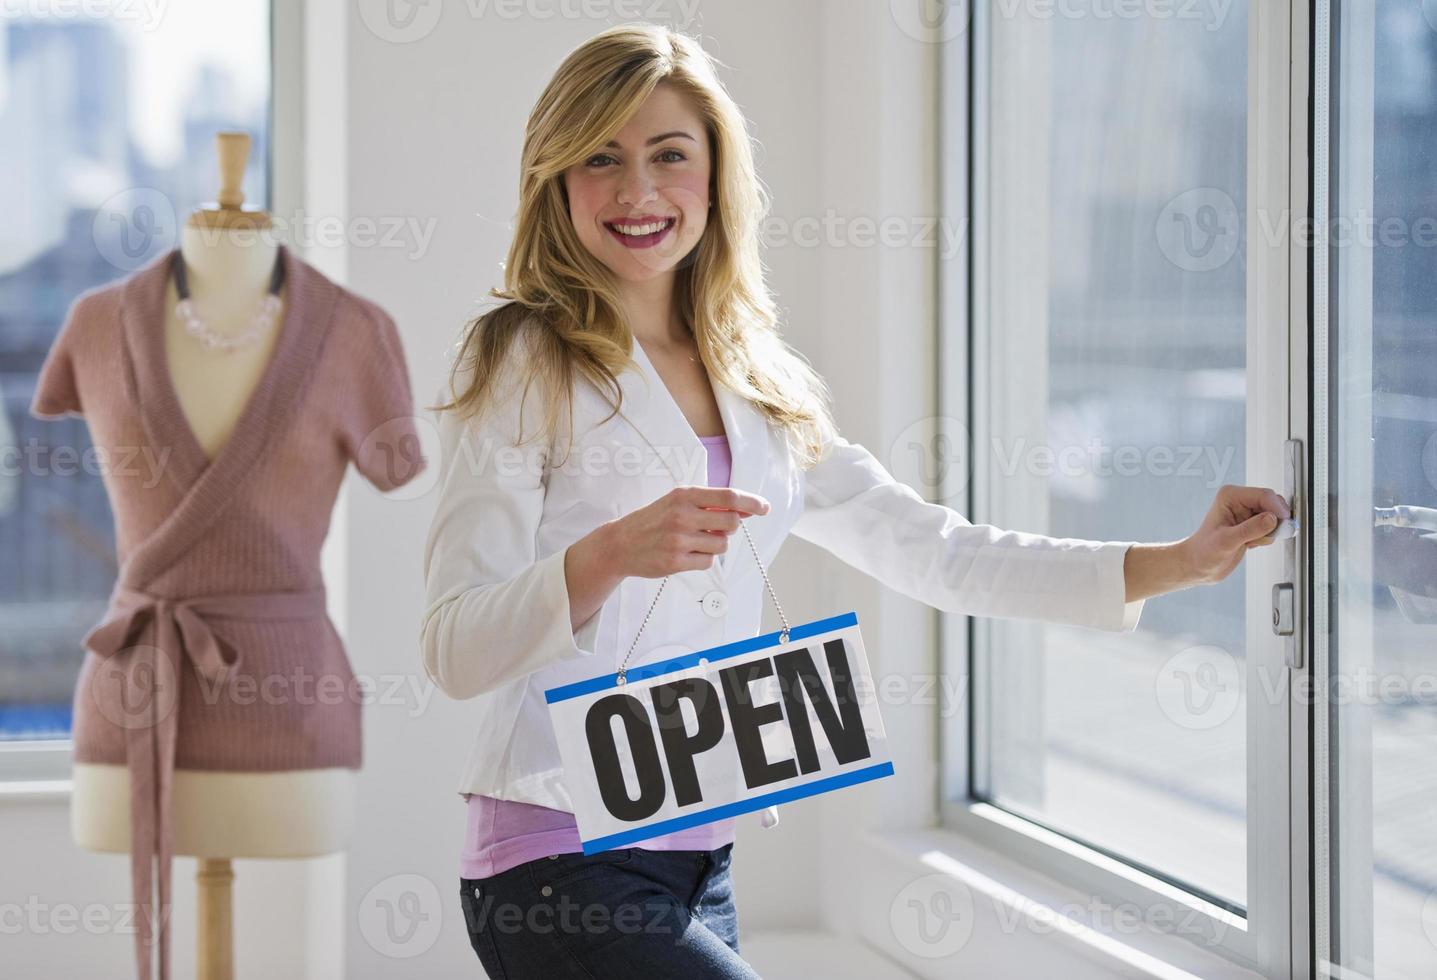 Shopkeeper holding open sign photo